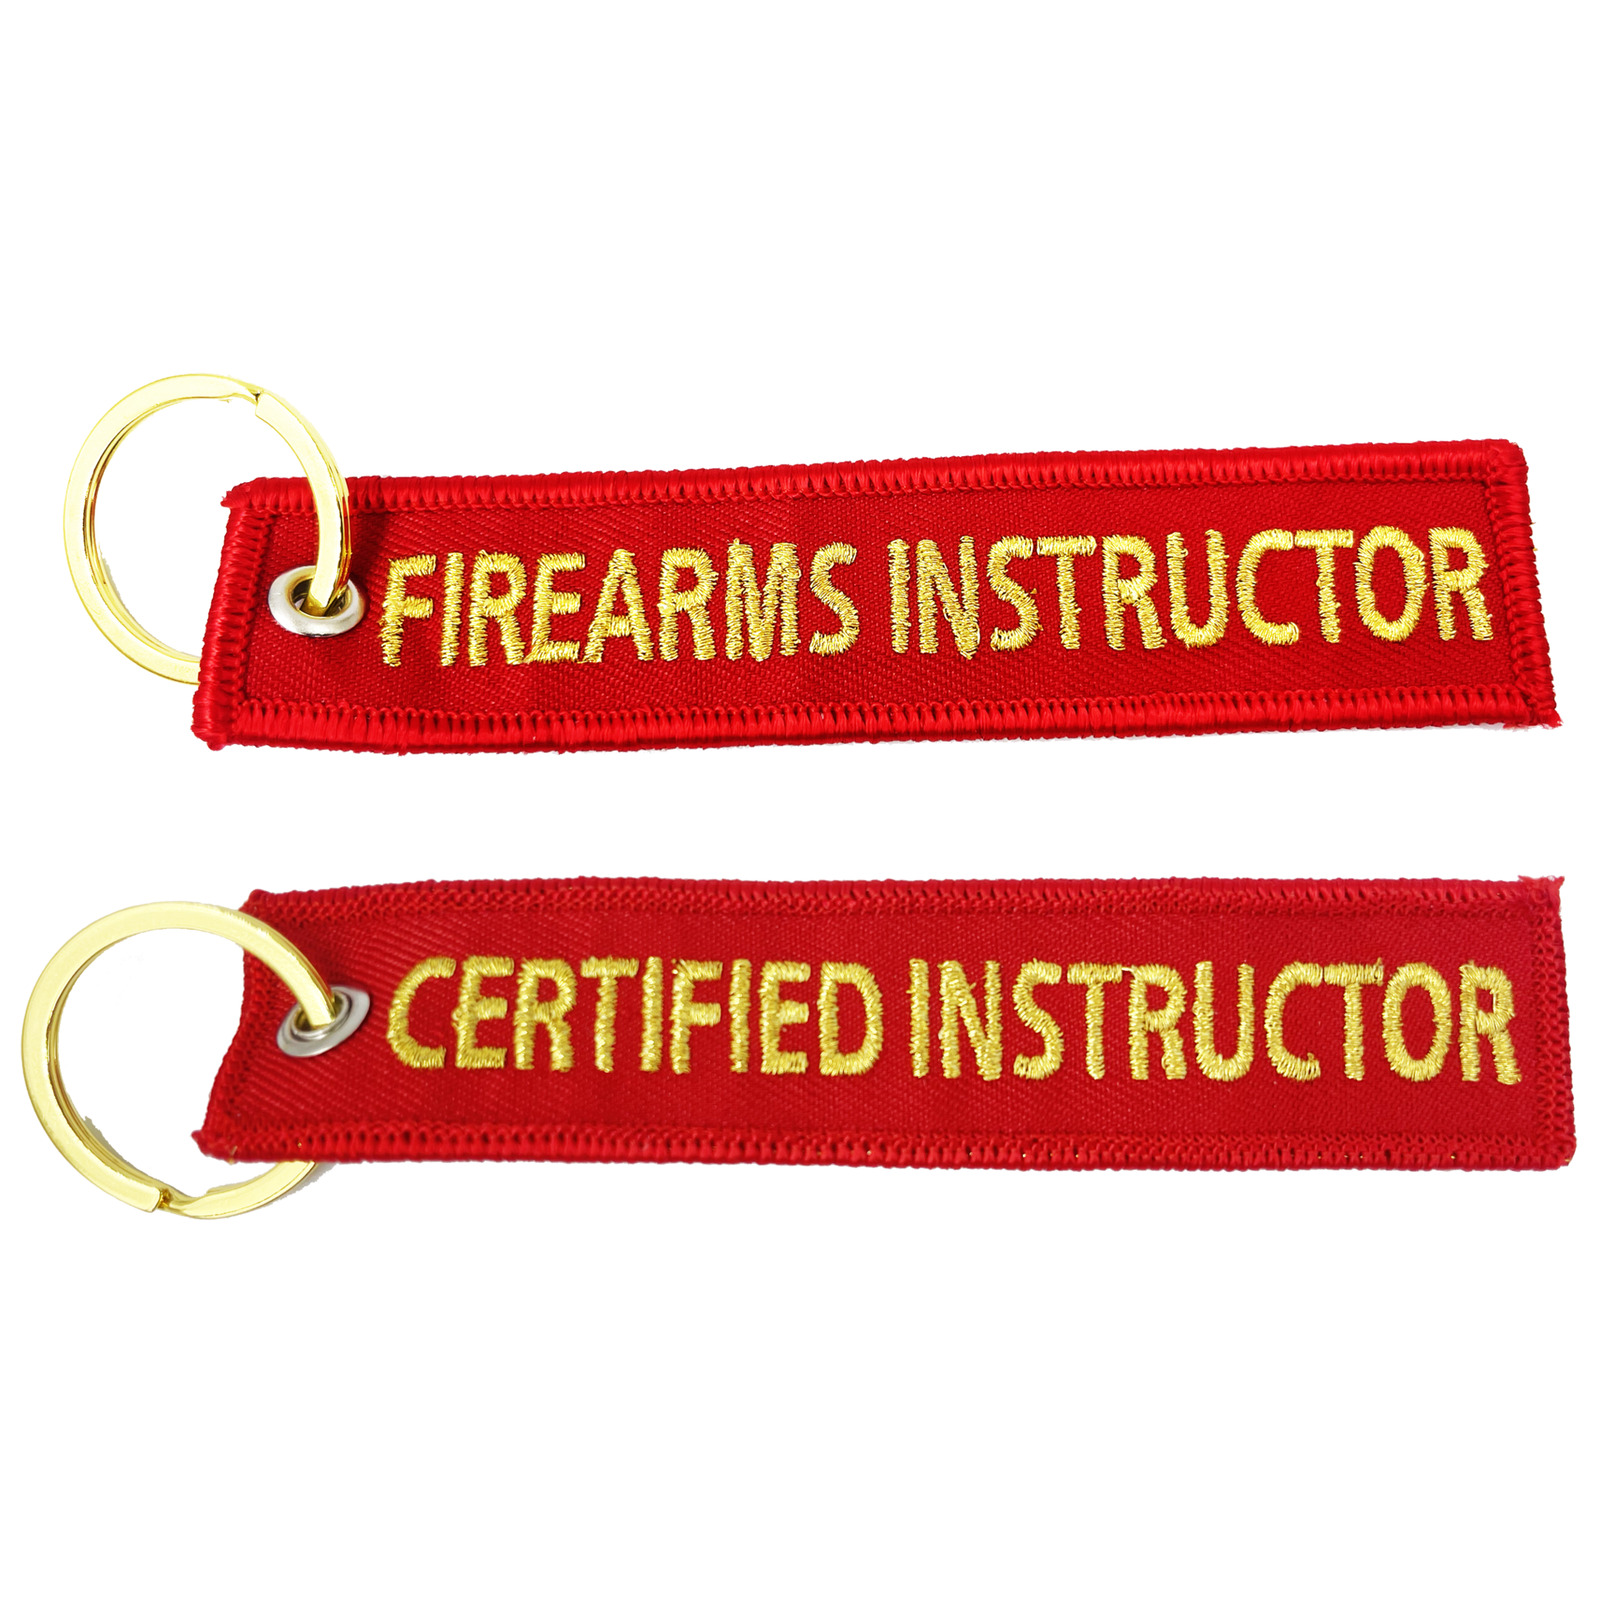 FIREARMS INSTRUCTOR keychain LUGGAGE TAG ZIPPER PULL CERTIFIED Range Master BL14